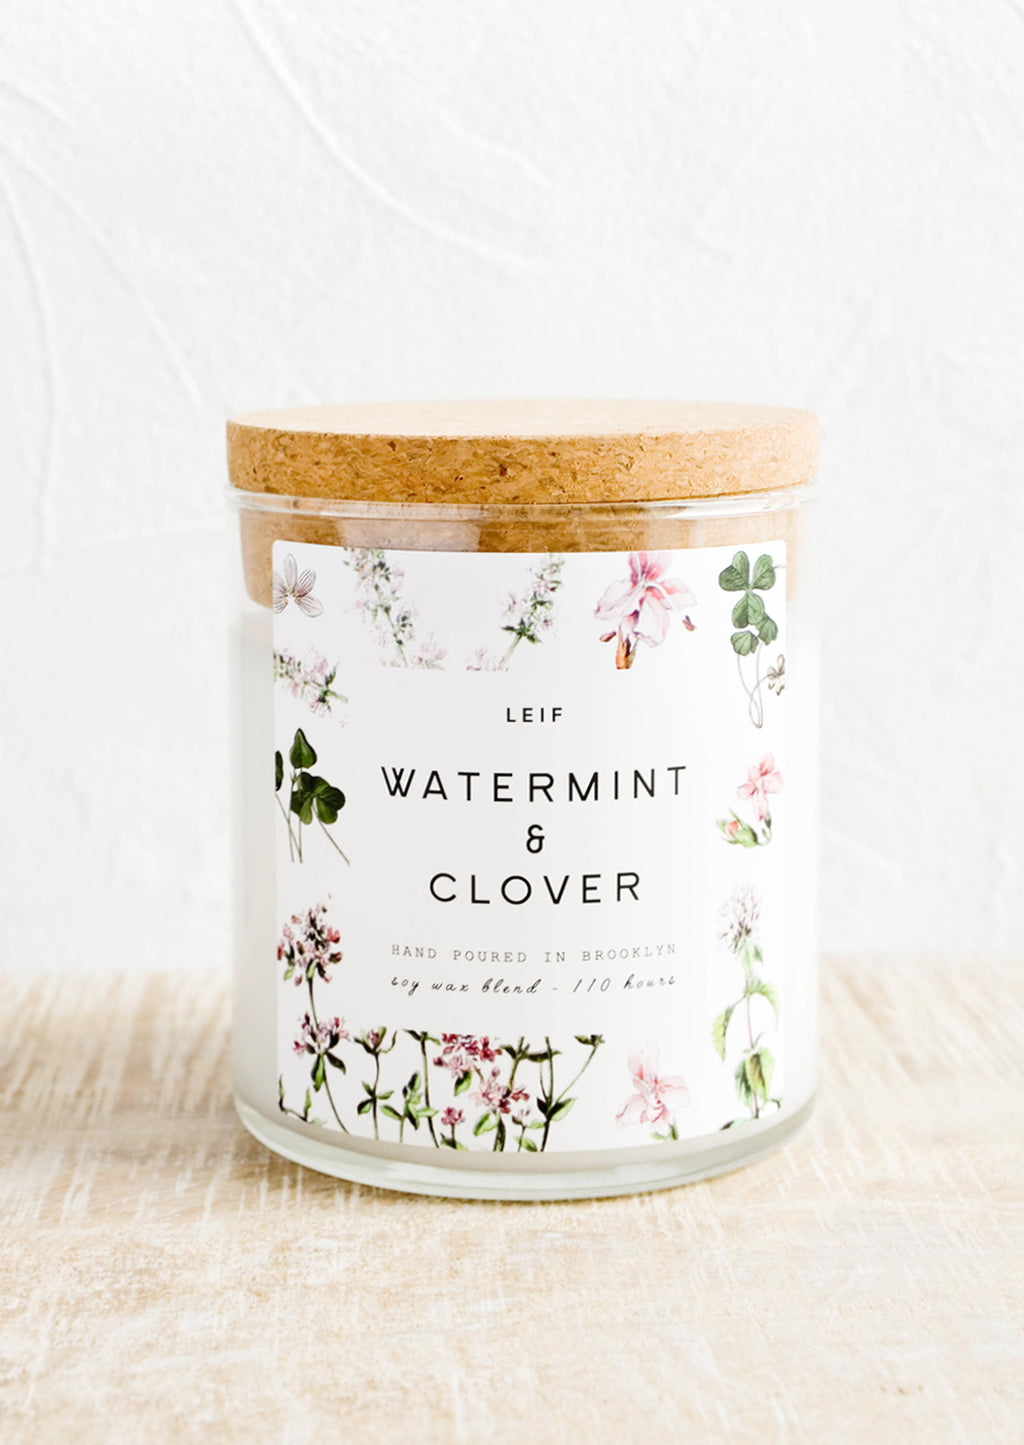 Watermint & Clover: A glass candle with a cork lid and white botanical printed label reading "watermint and clover".